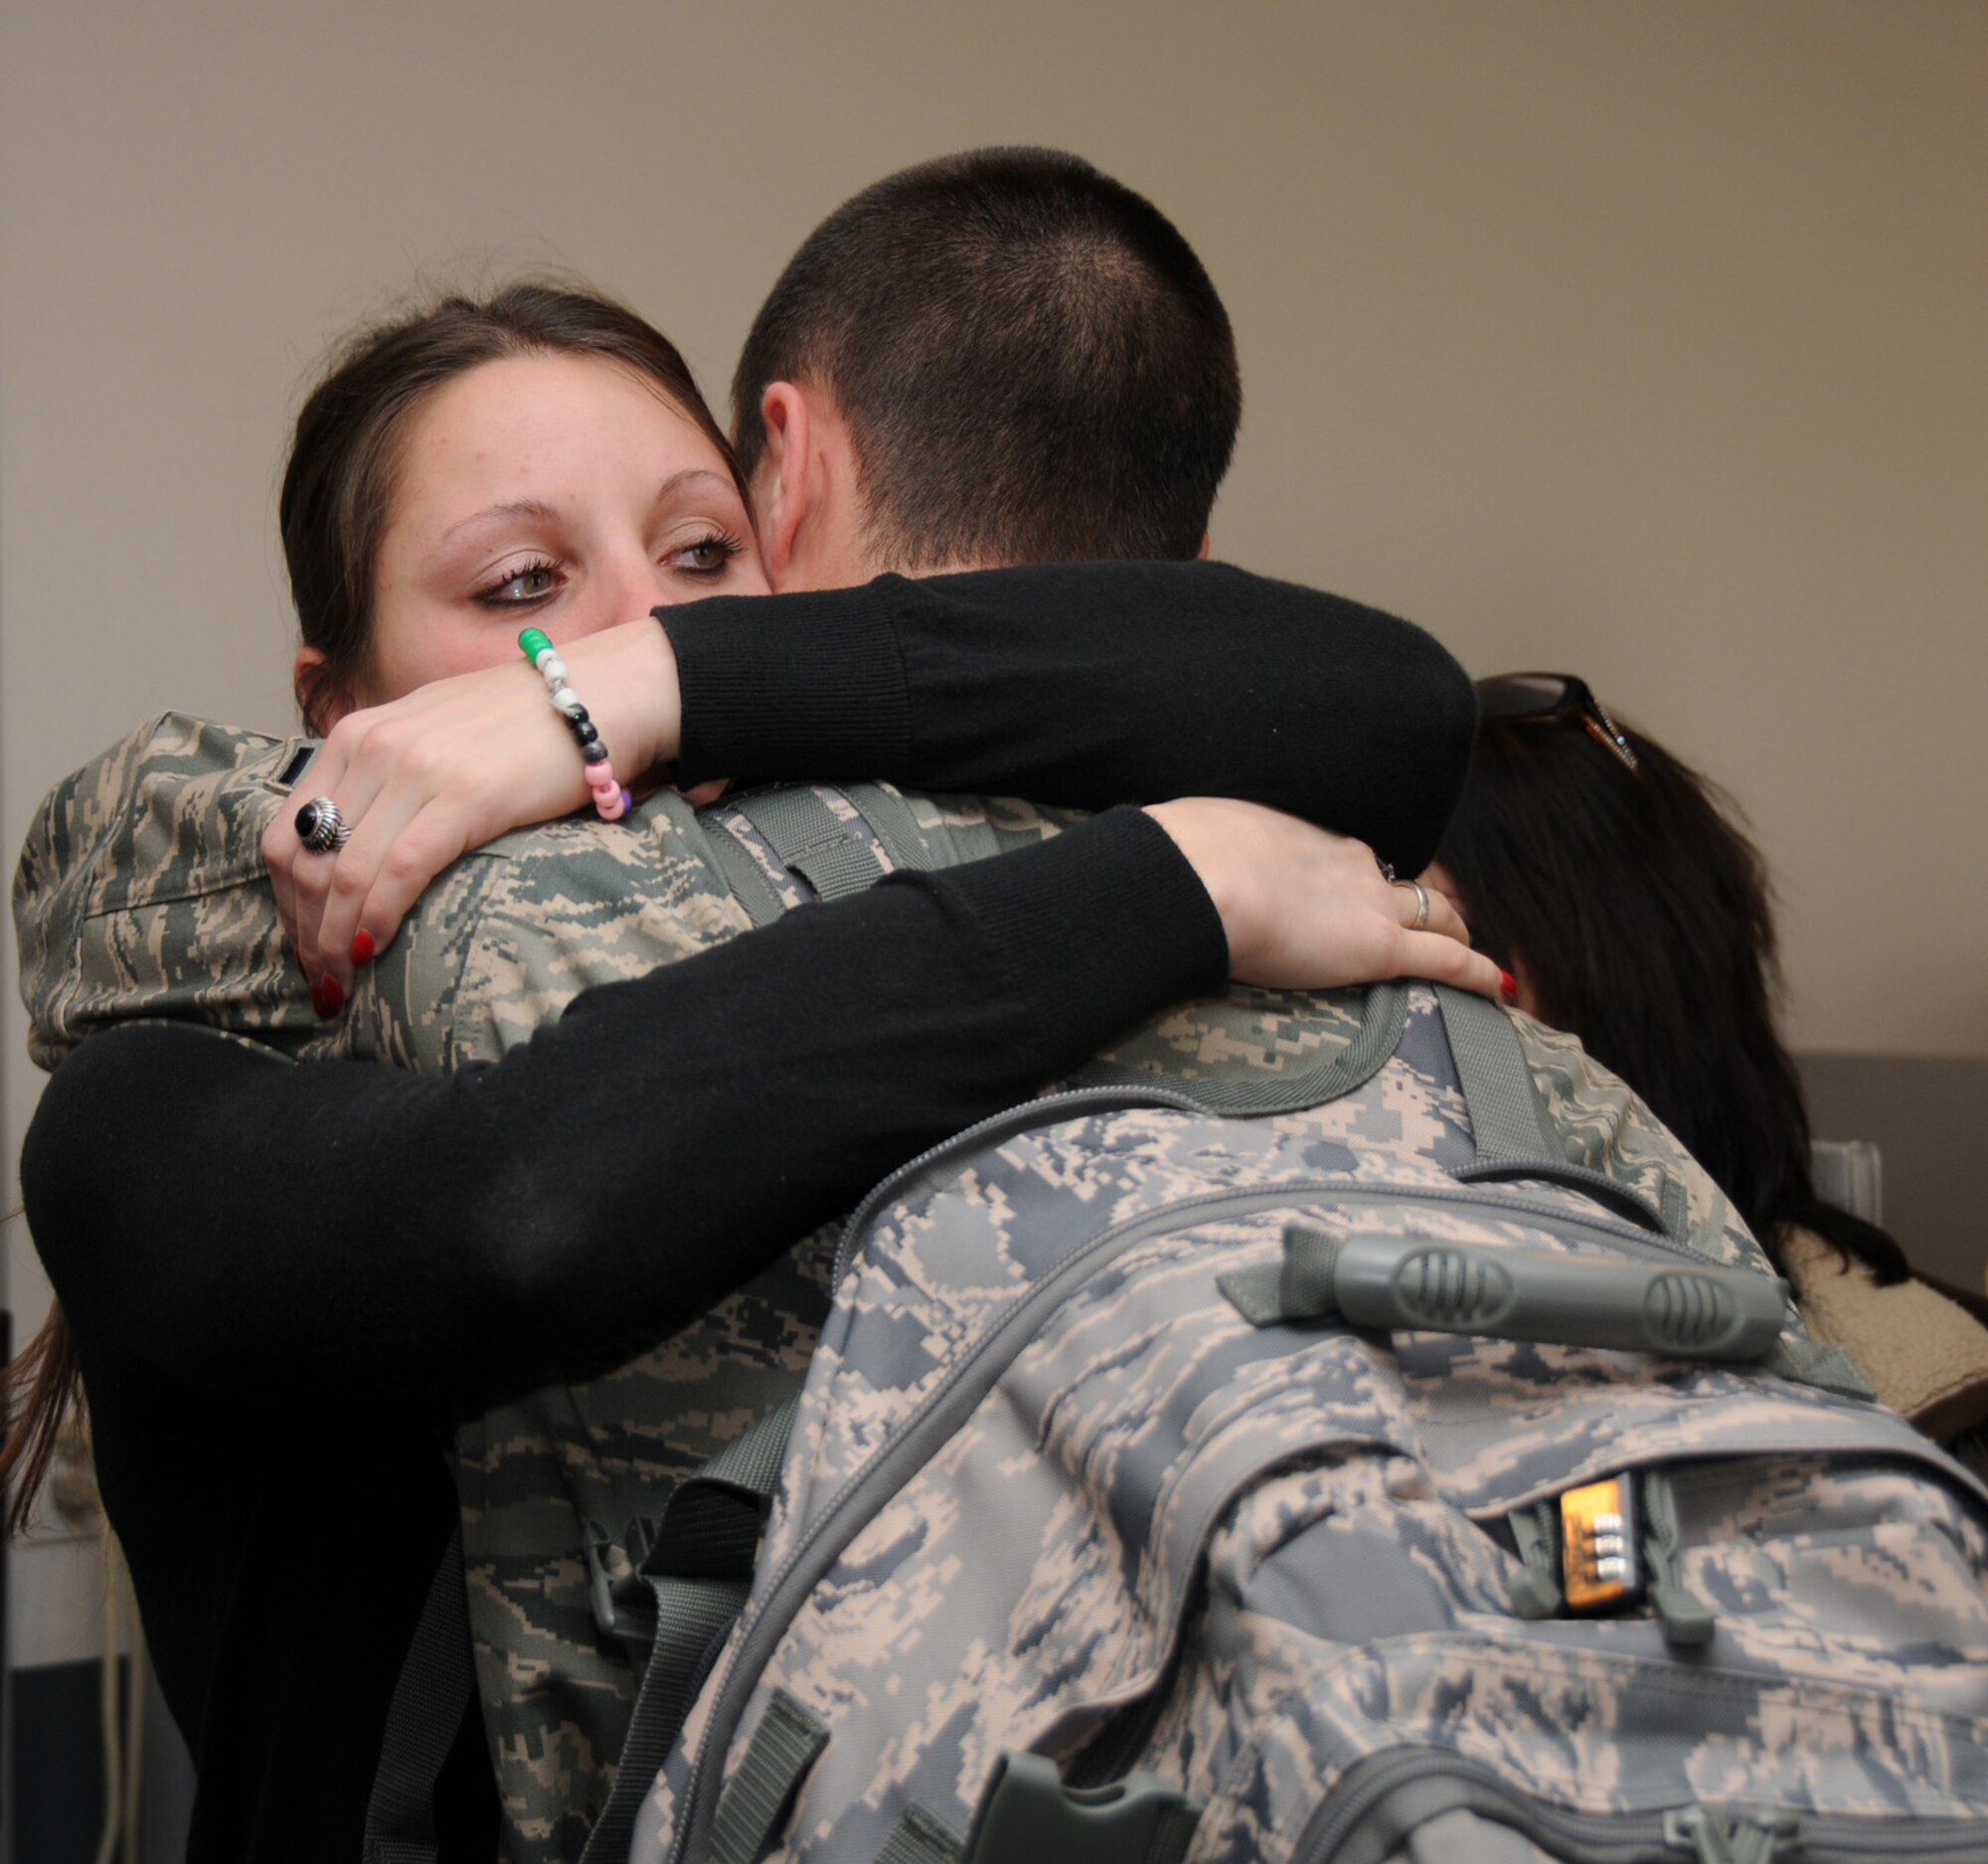 A member of the 188th Fighter Wing hugs a family member prior to departing for Afghanistan Jan. 4, 2010. The 188th deployed approximately 50 Airmen to Afghanistan for a four-month Aerospace Expeditionary Force (AEF) rotation. The remainder of the 188th personnel, approximately 250, will begin its portion of the rotation in March 2010, when the 188th's official rotation begins. (U.S. Air Force photo by Tech. Sgt. Stephen Hornsey)